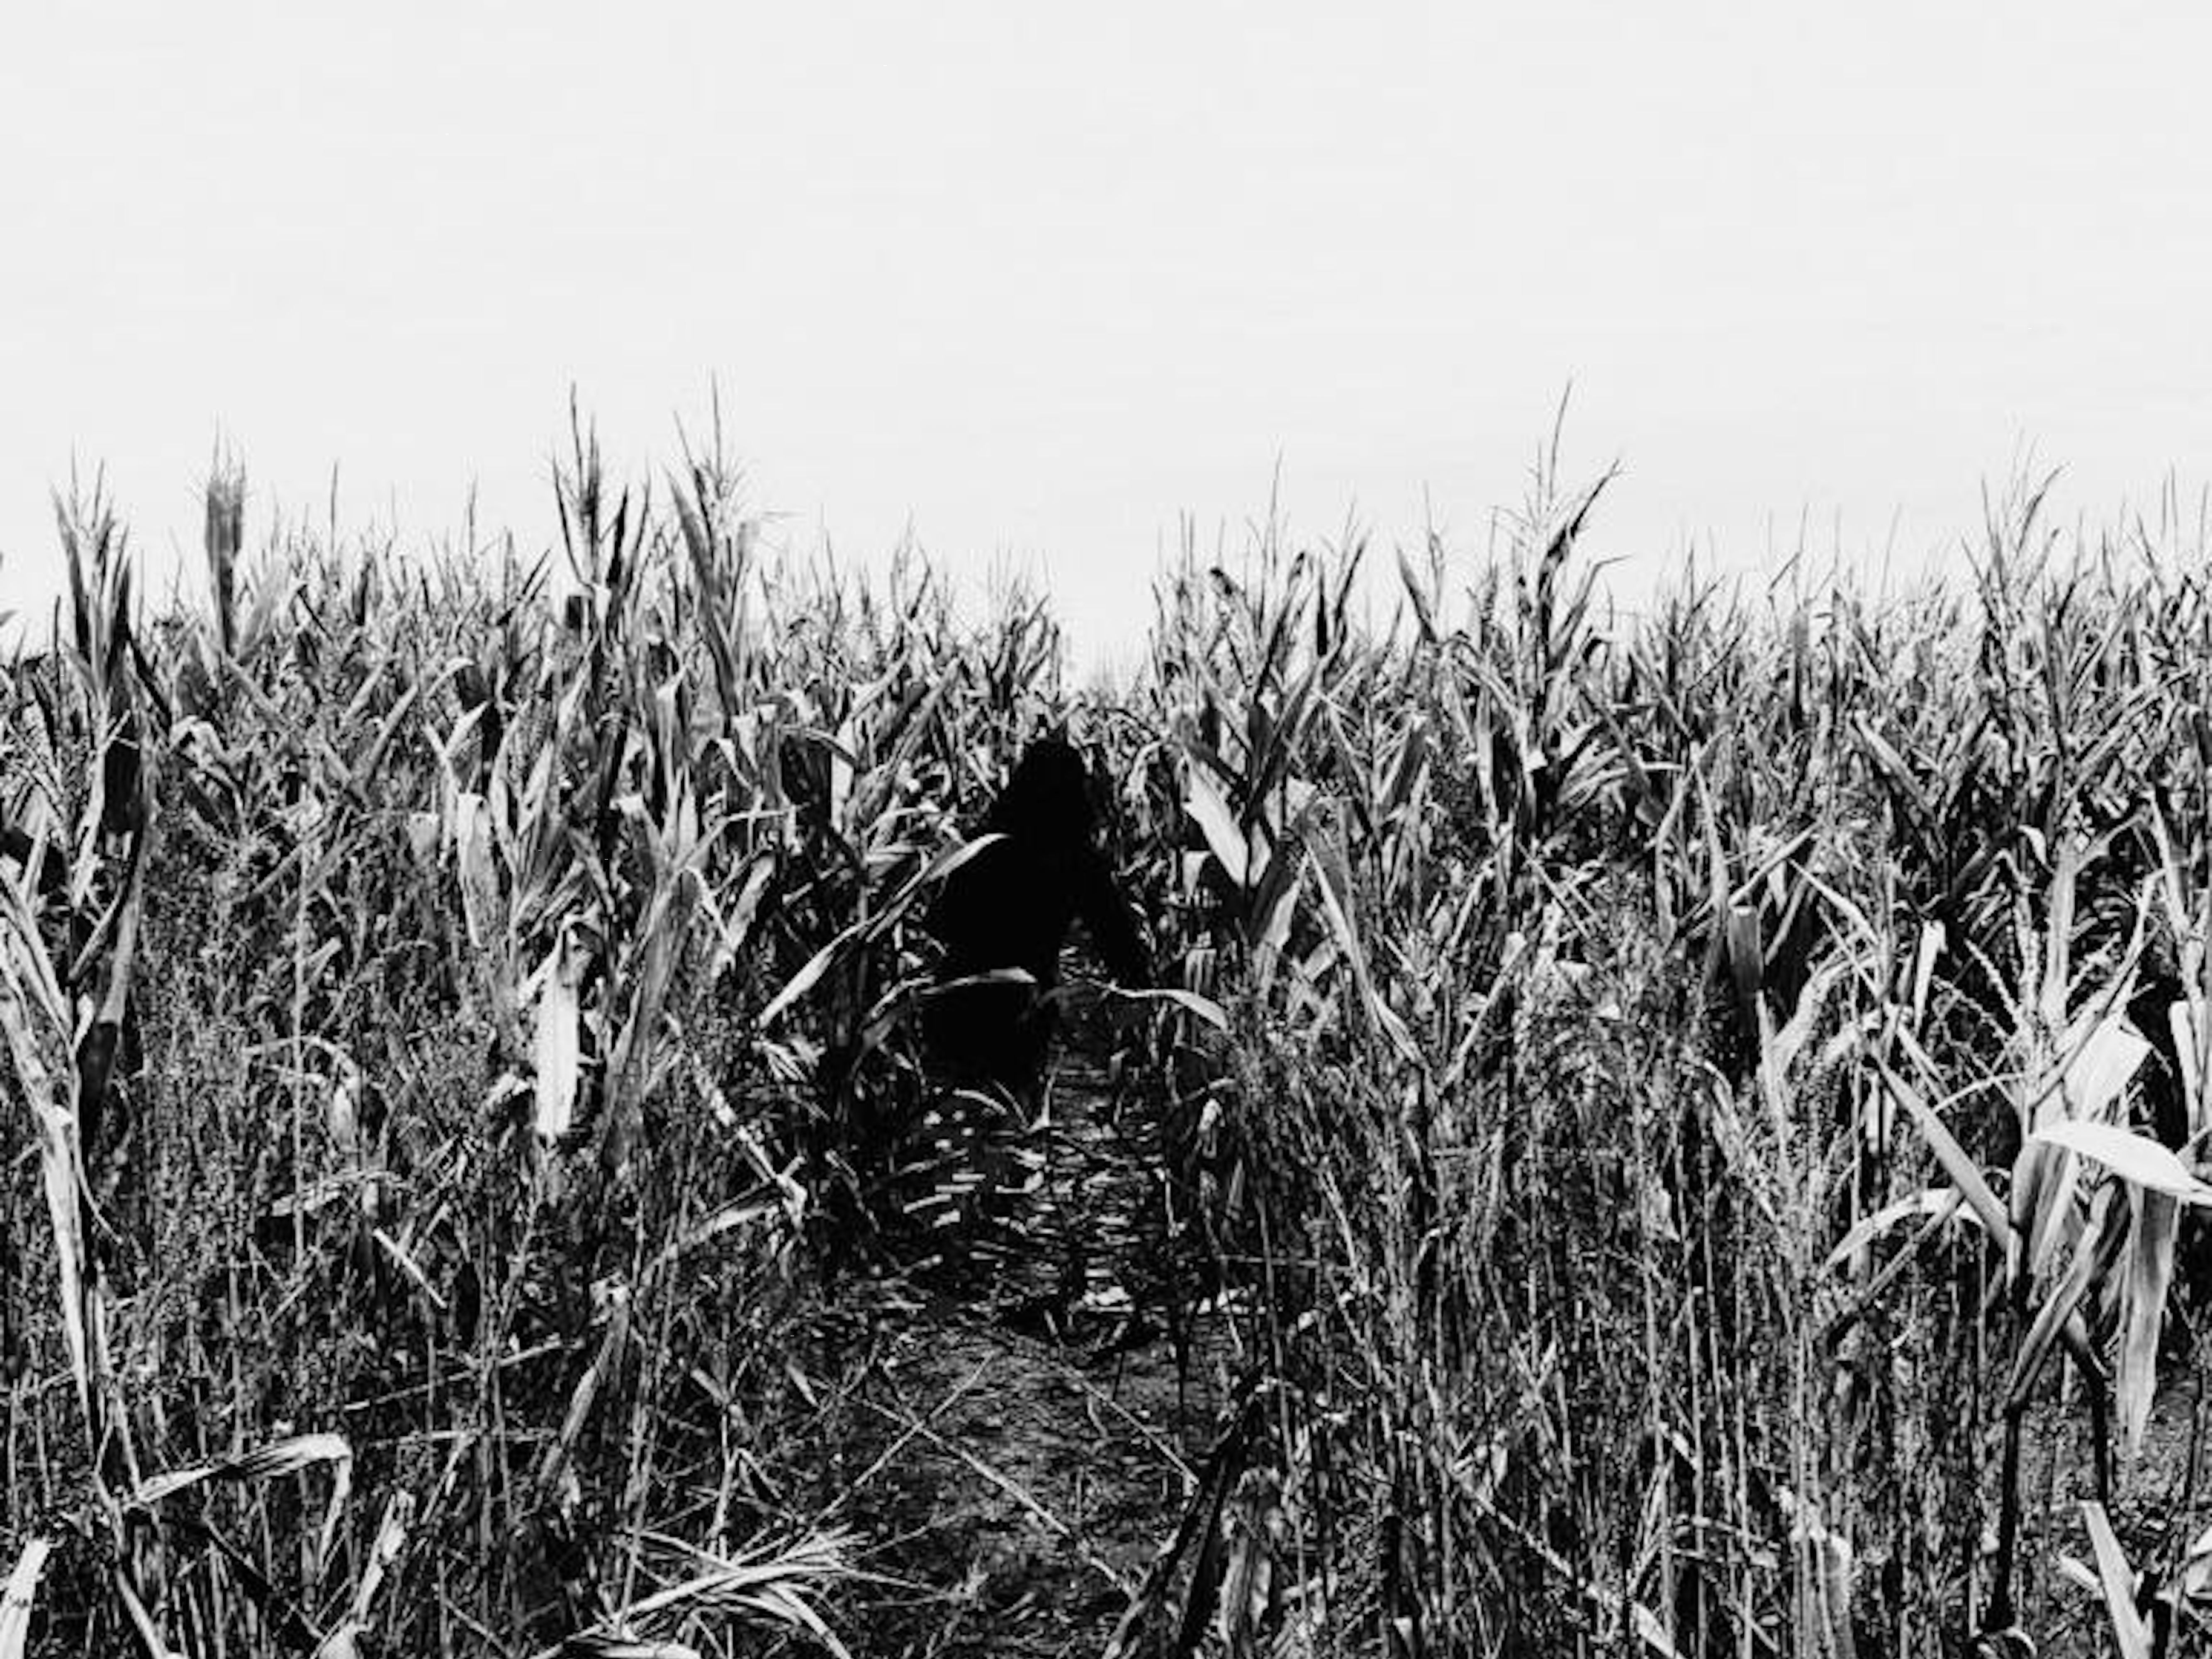 A monochrome photograph of a wheatfield which was used as the front cover for Dr Sayad's book The Ghost in the Image